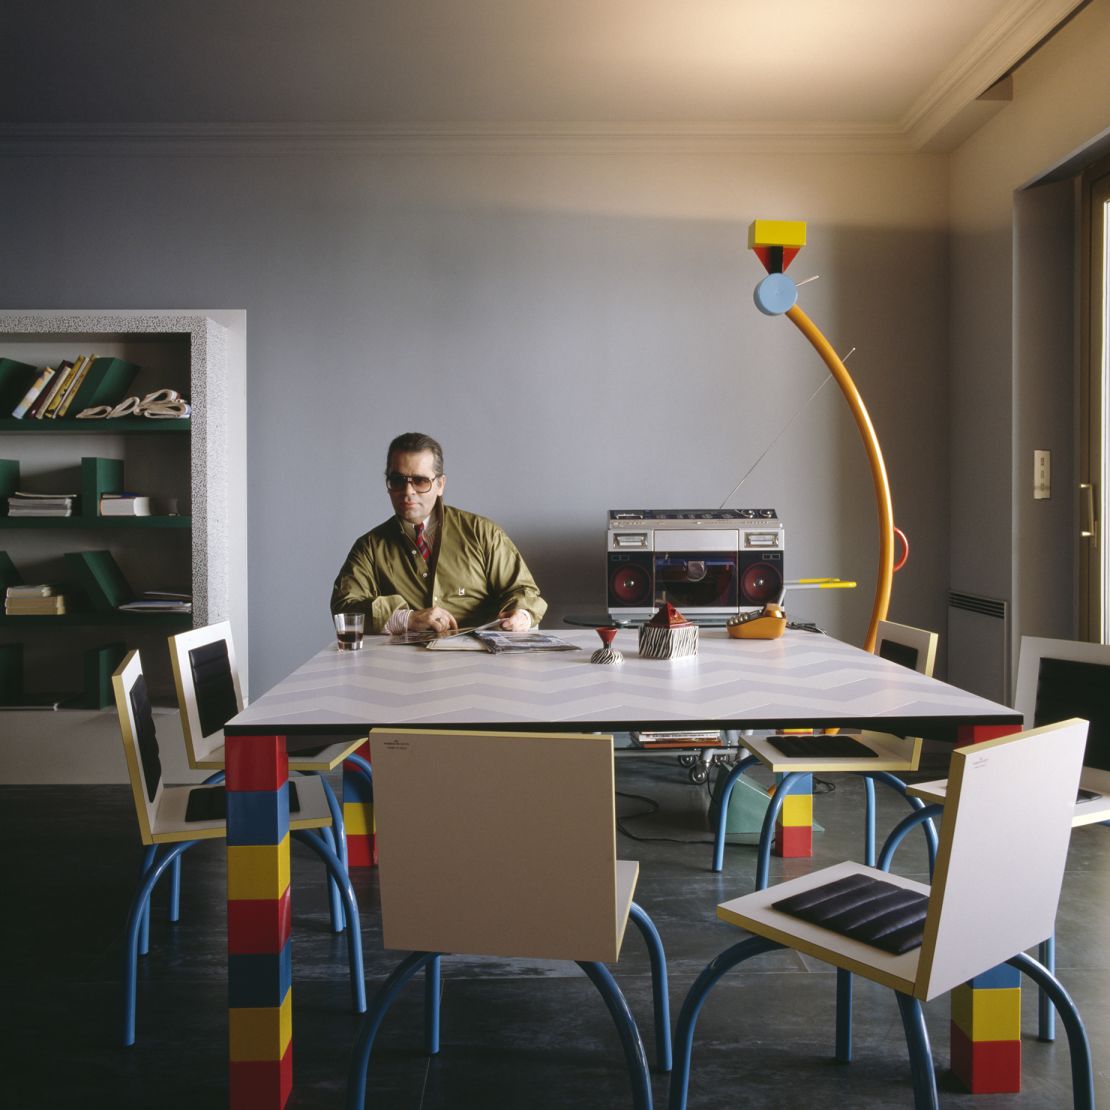 Lagerfeld poses at the über-modern dining table in his Monte Carlo apartment, which he purchased in the early 19080s, a Diet Coke-filled glass (the designer was well-known for his love of the soda) at hand.